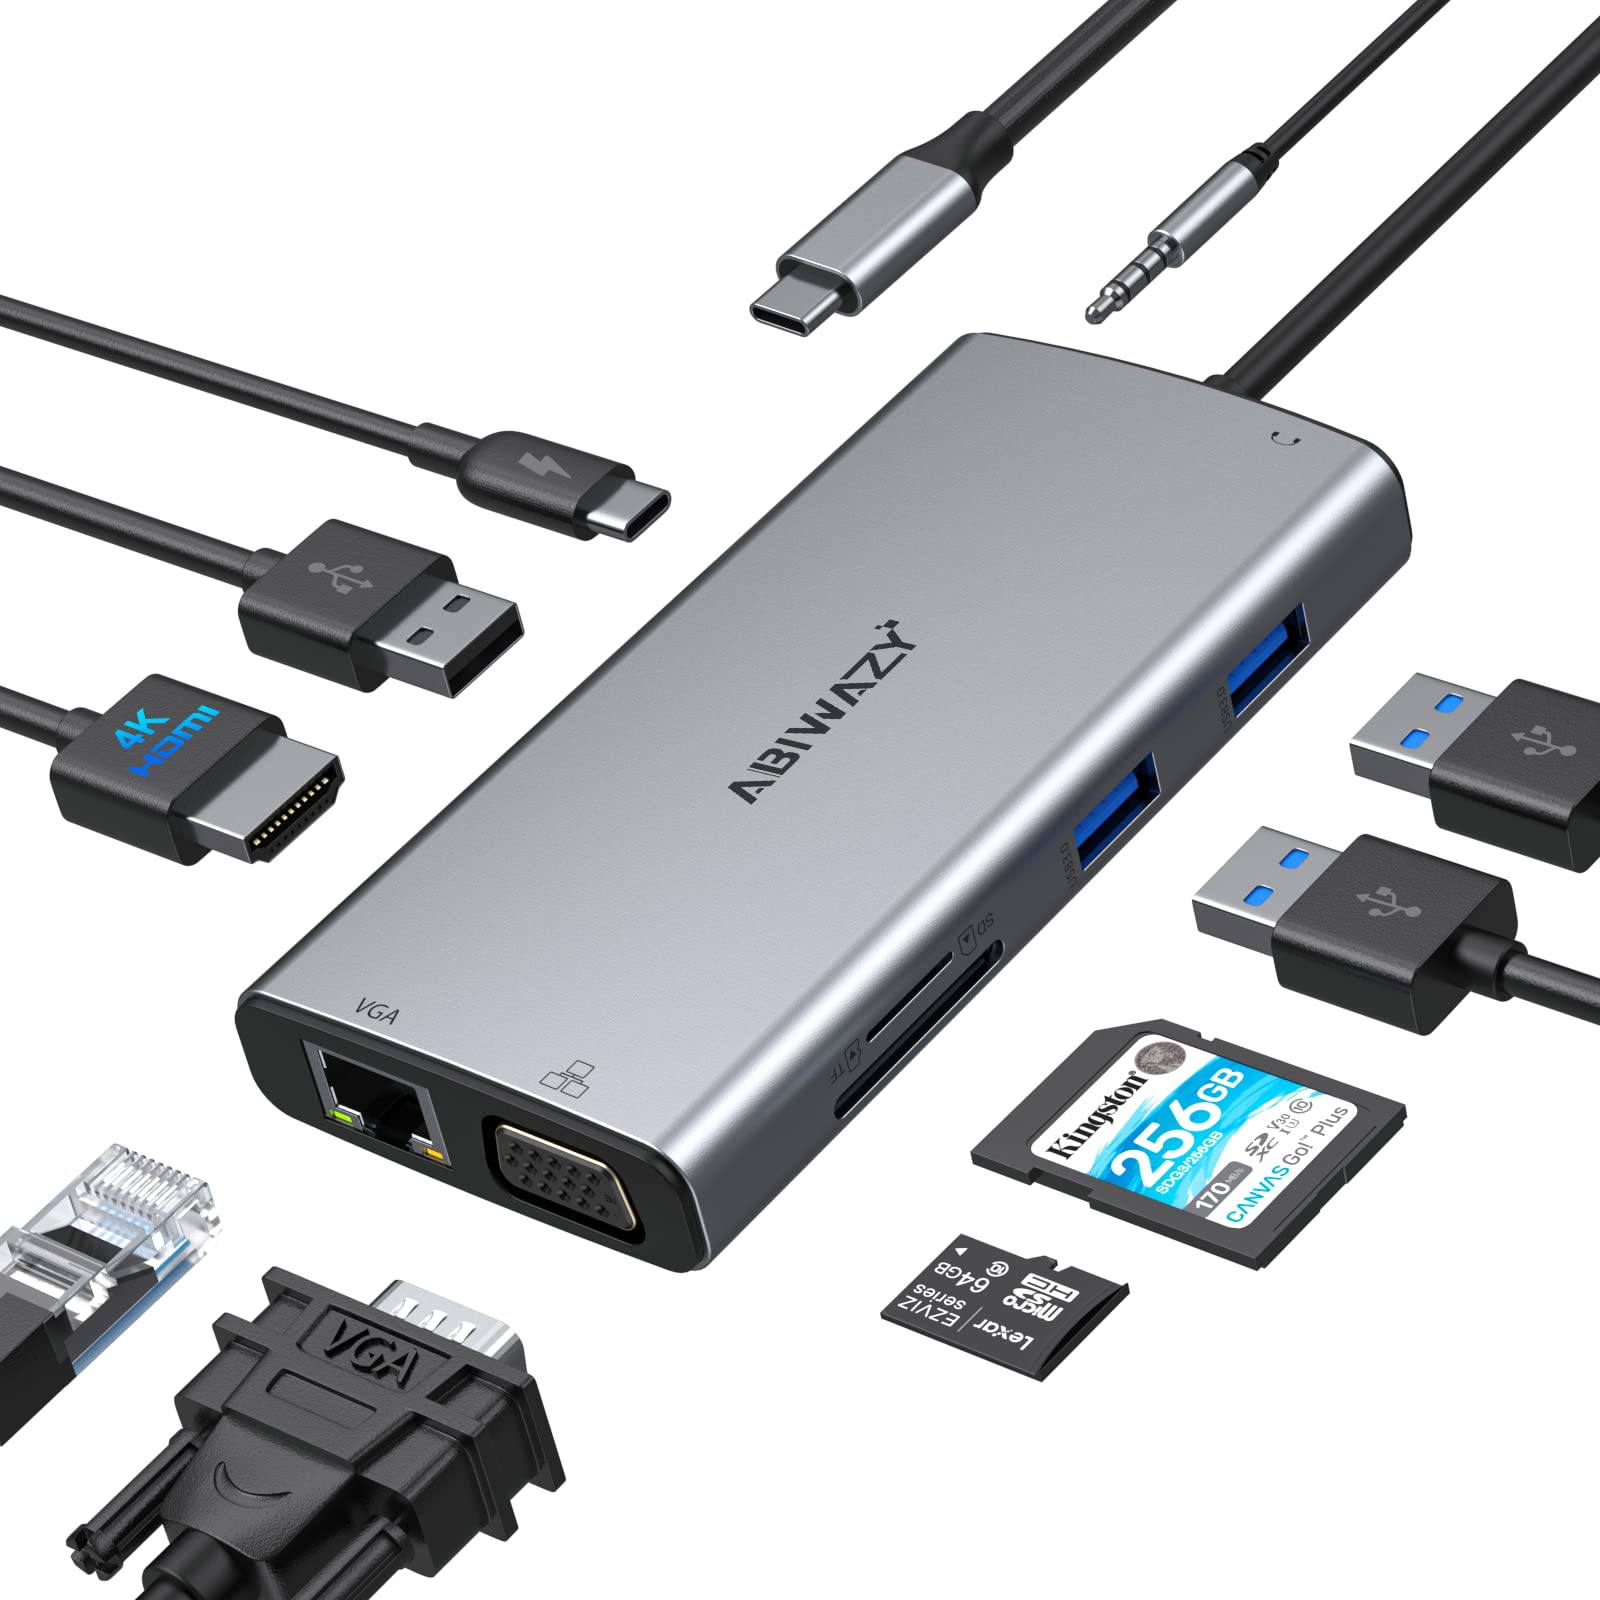 Step 1: Check the connection:
Ensure that the USB or Thunderbolt cable is securely connected to both the external drive and the Mac.